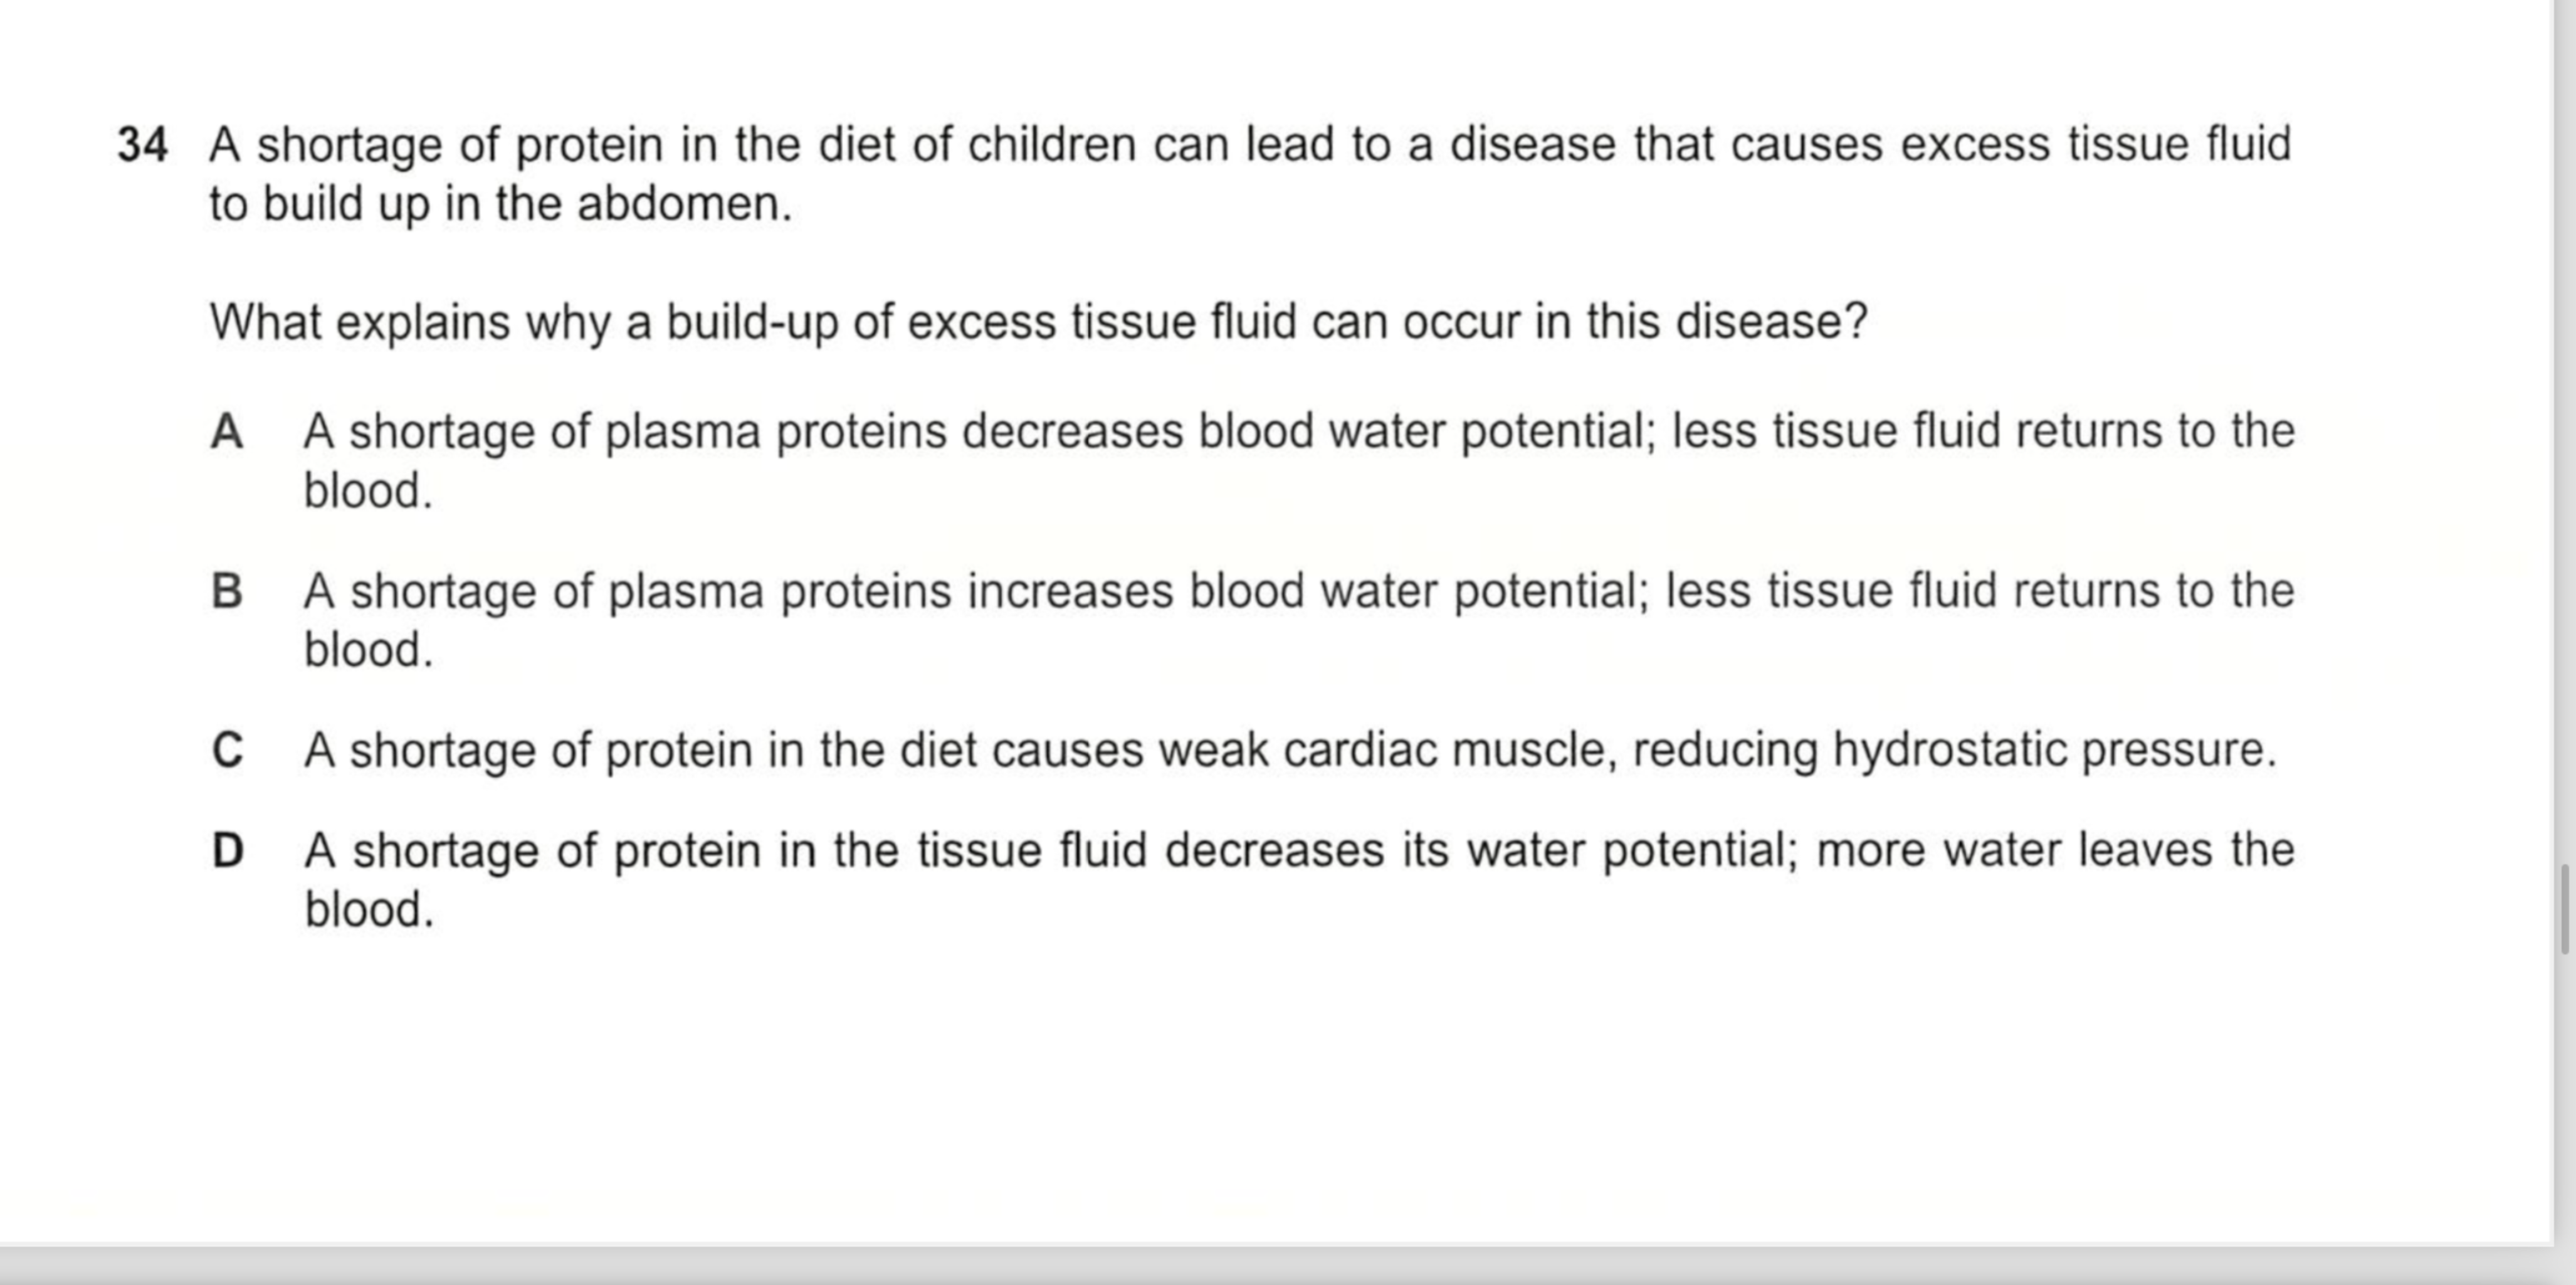 34 A shortage of protein in the diet of children can lead to a disease